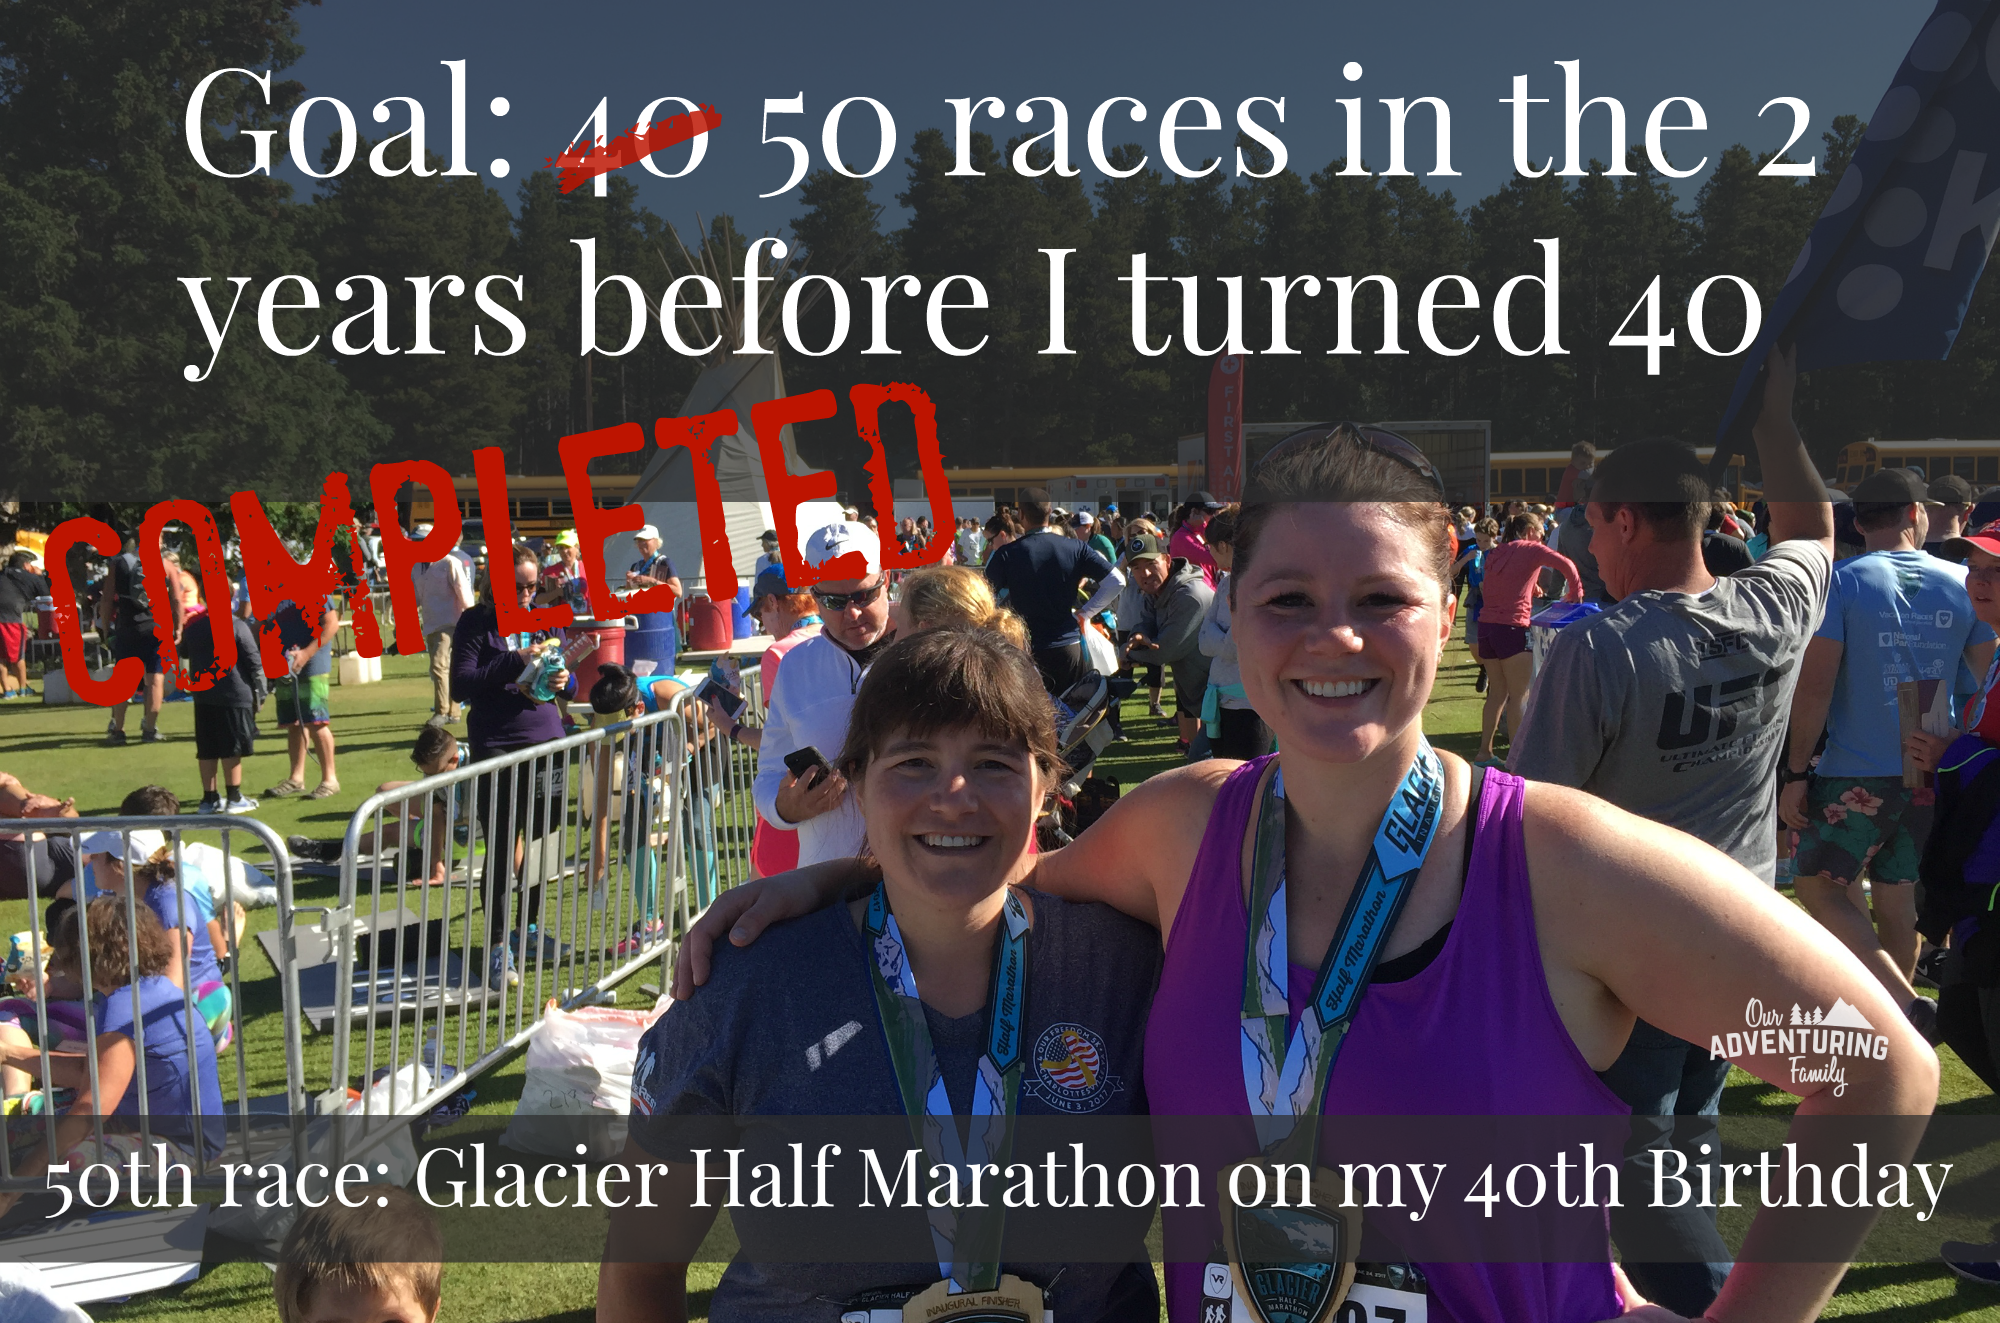 How I stayed motivated and finished 50 races before I turned 40